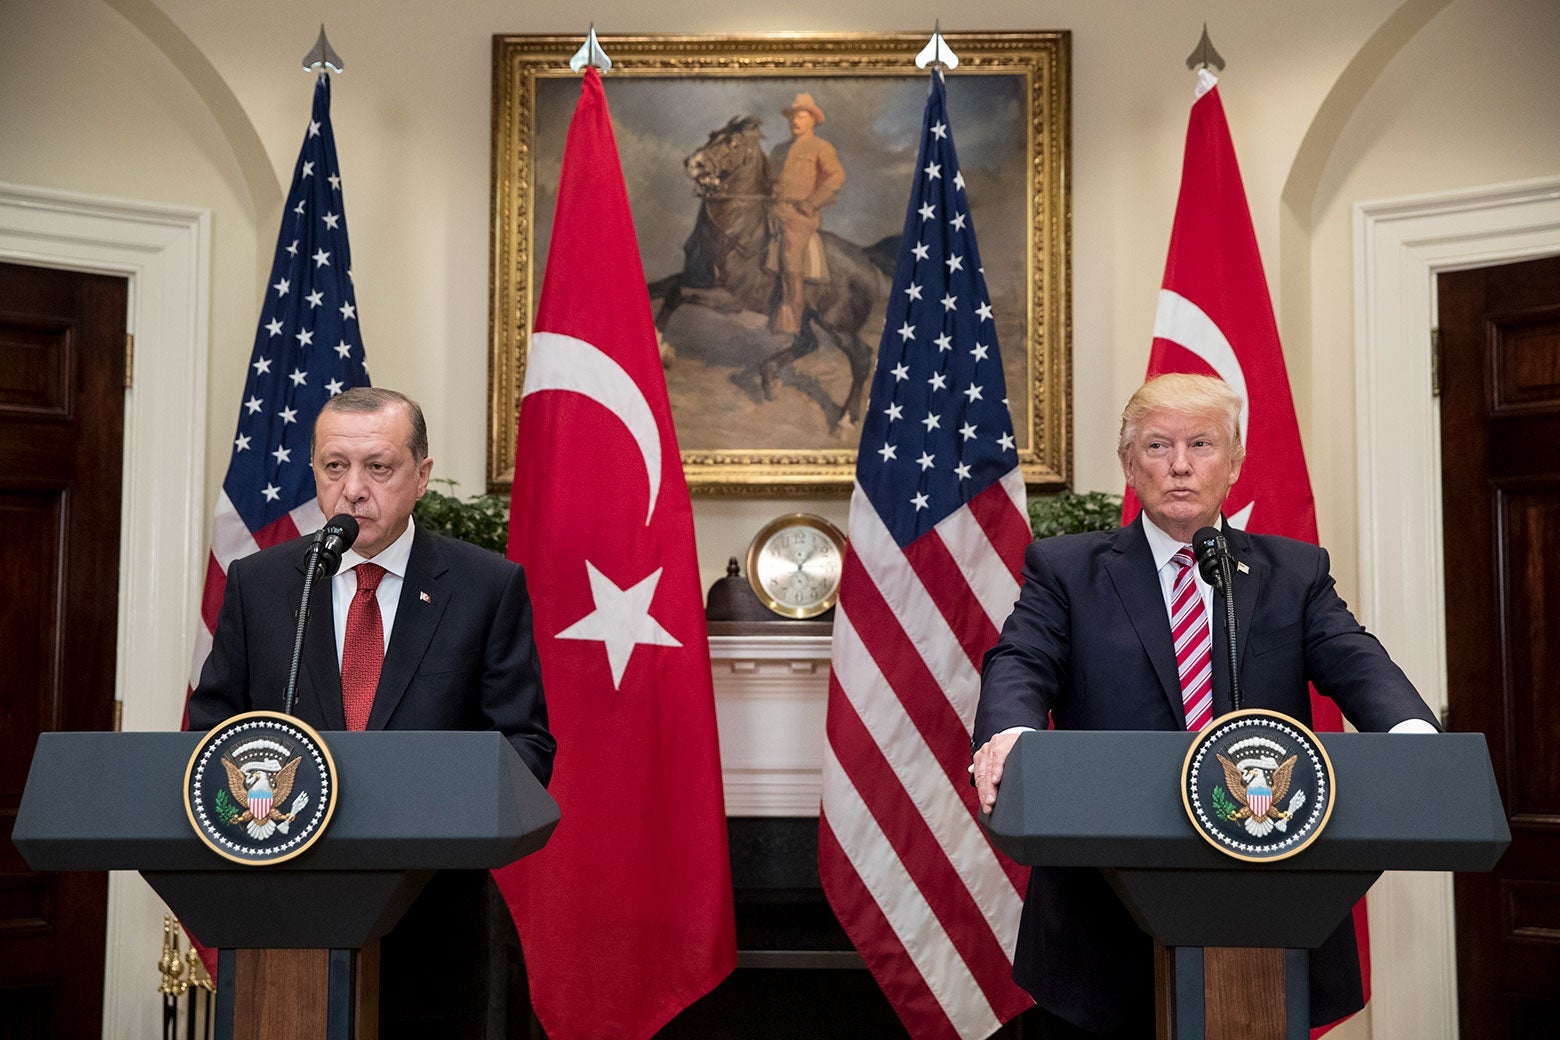 Turkish President Recep Tayyip Erdogan and U.S. President Donald Trump at the White House on May 16, 2017.